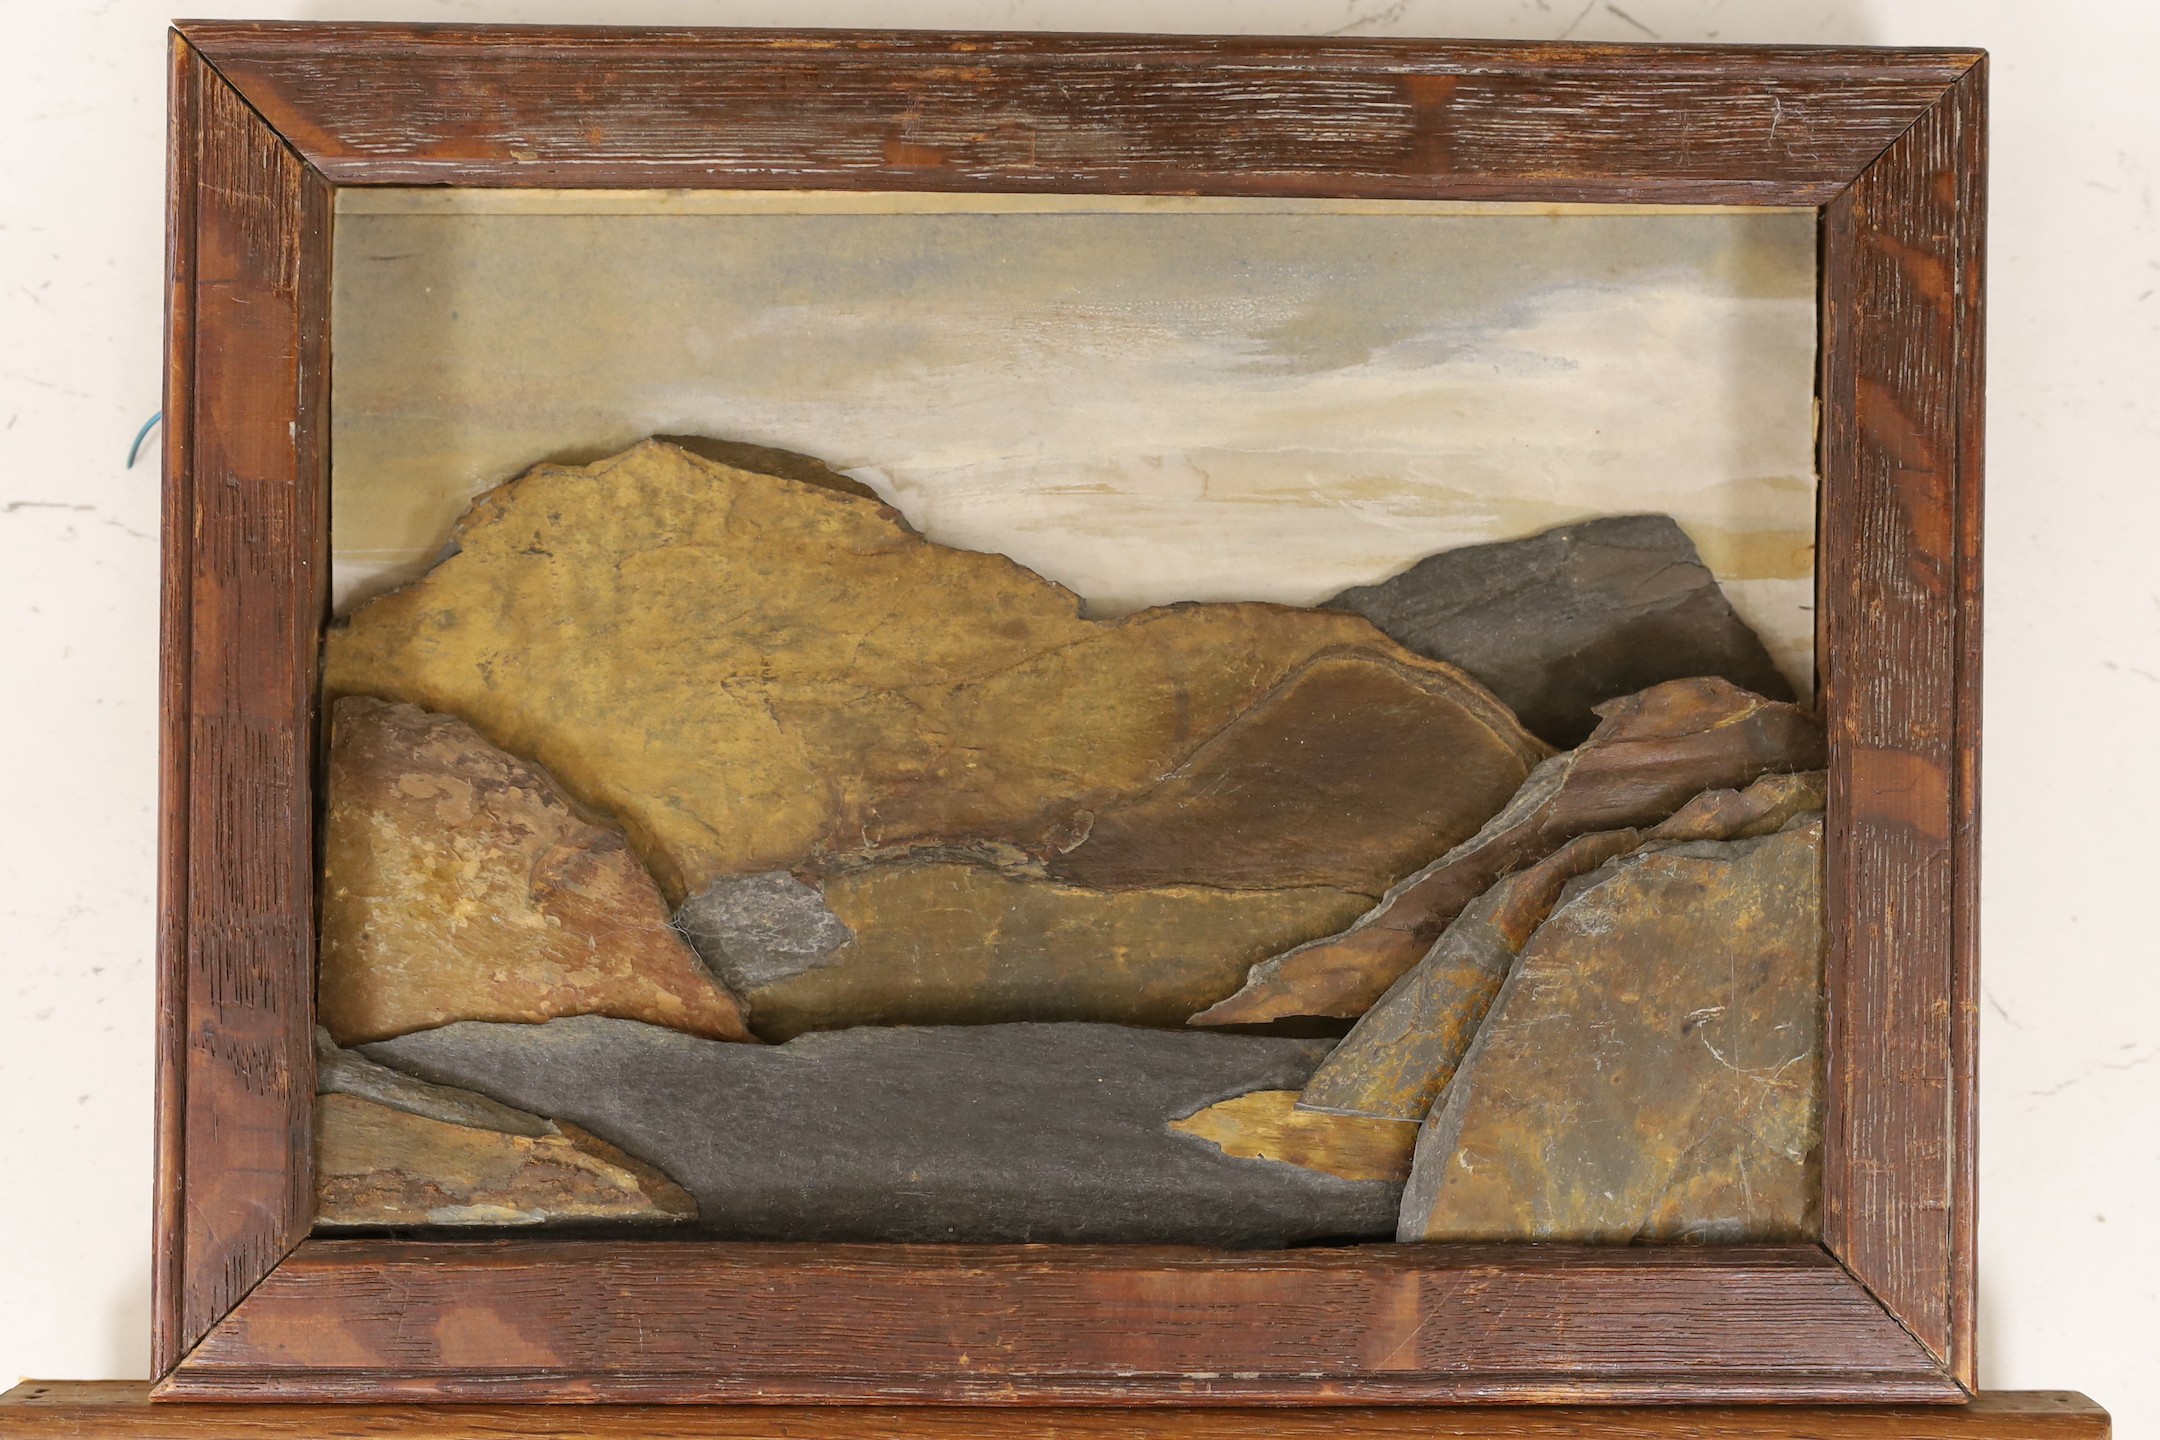 Ede Fitzpatrick. Irish Tweed picture, Connemara cottages, initialled and labelled verso, 22 x 30cm, with a Welsh slate picture, Y Carn and Llyn Ogwen, 16 x 23cm